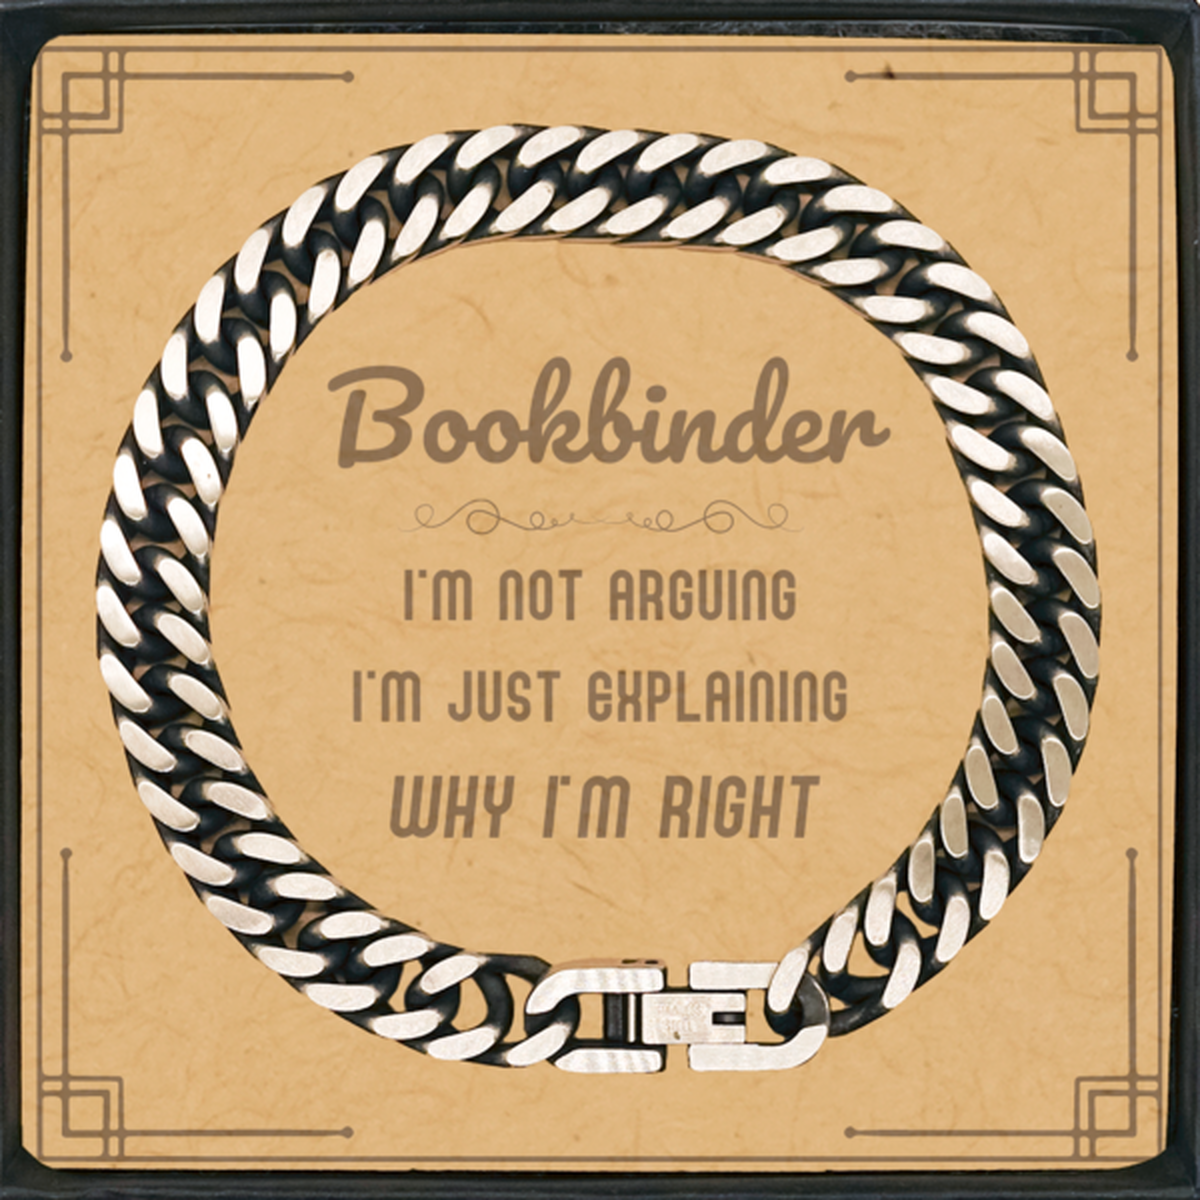 Bookbinder I'm not Arguing. I'm Just Explaining Why I'm RIGHT Cuban Link Chain Bracelet, Funny Saying Quote Bookbinder Gifts For Bookbinder Message Card Graduation Birthday Christmas Gifts for Men Women Coworker